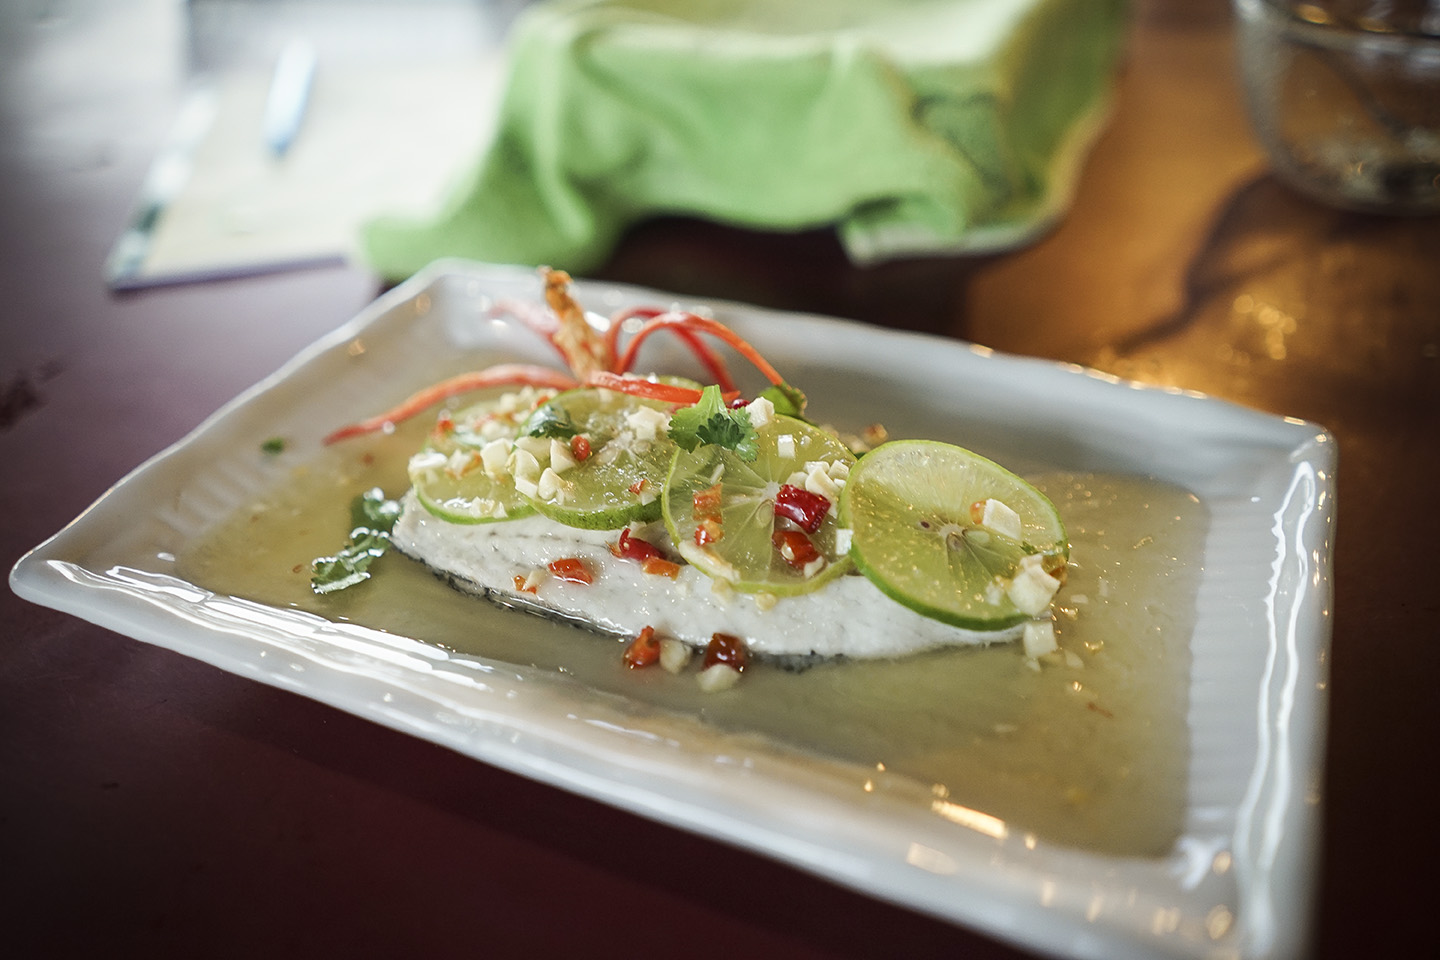 Steamed fish with Lime and Chili